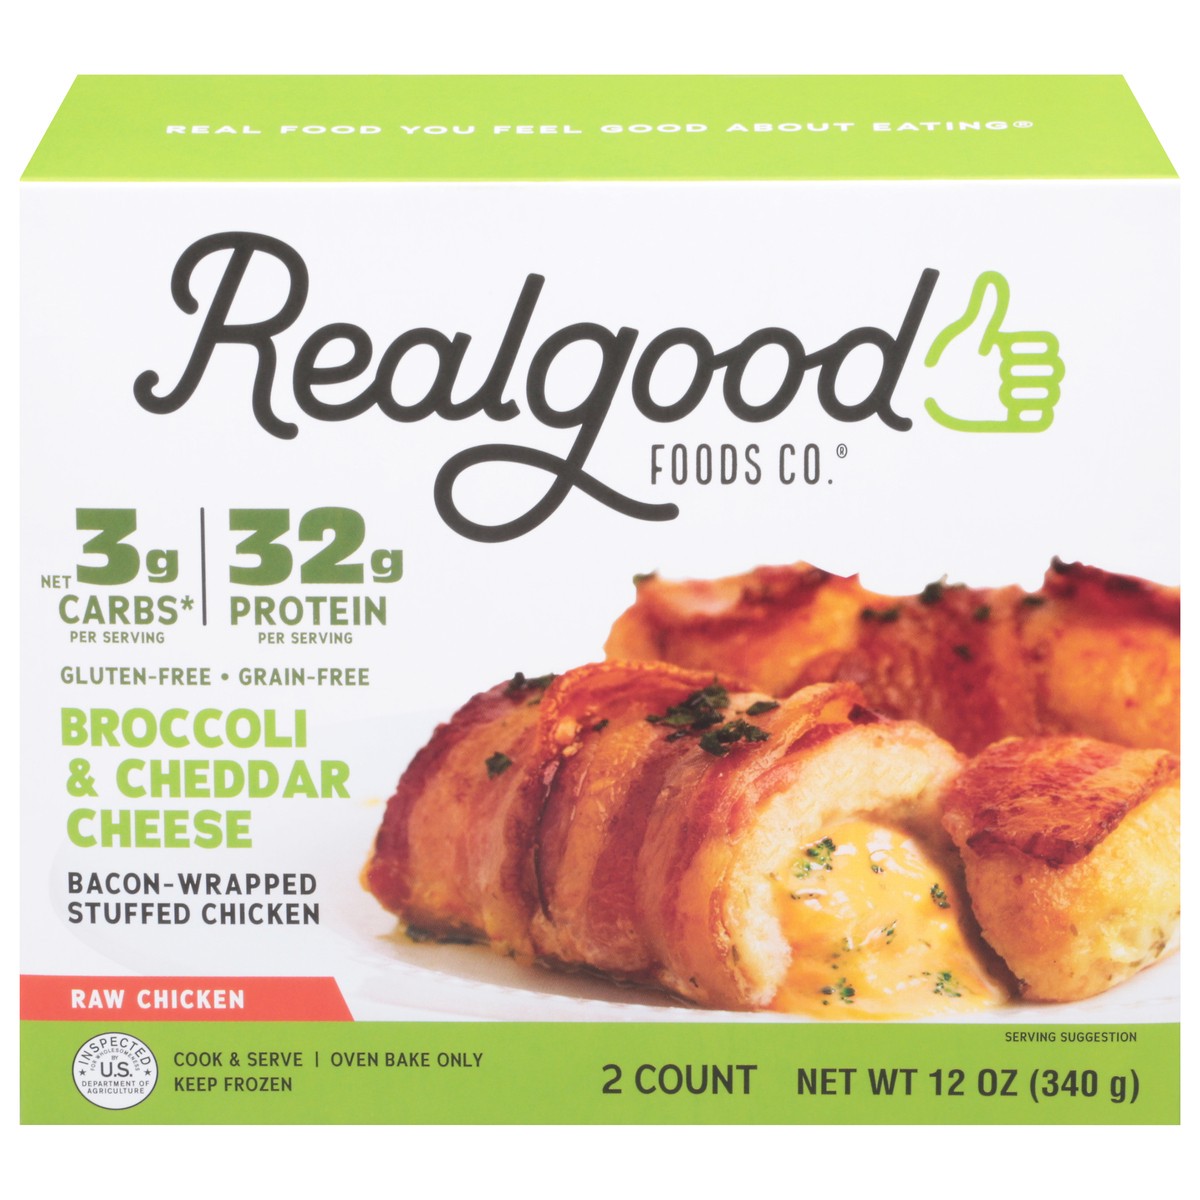 slide 11 of 11, Realgood Foods Co. Broccoli & Cheddar Cheese Bacon-Wrapped Stuffed Chicken 2 ea, 12 oz